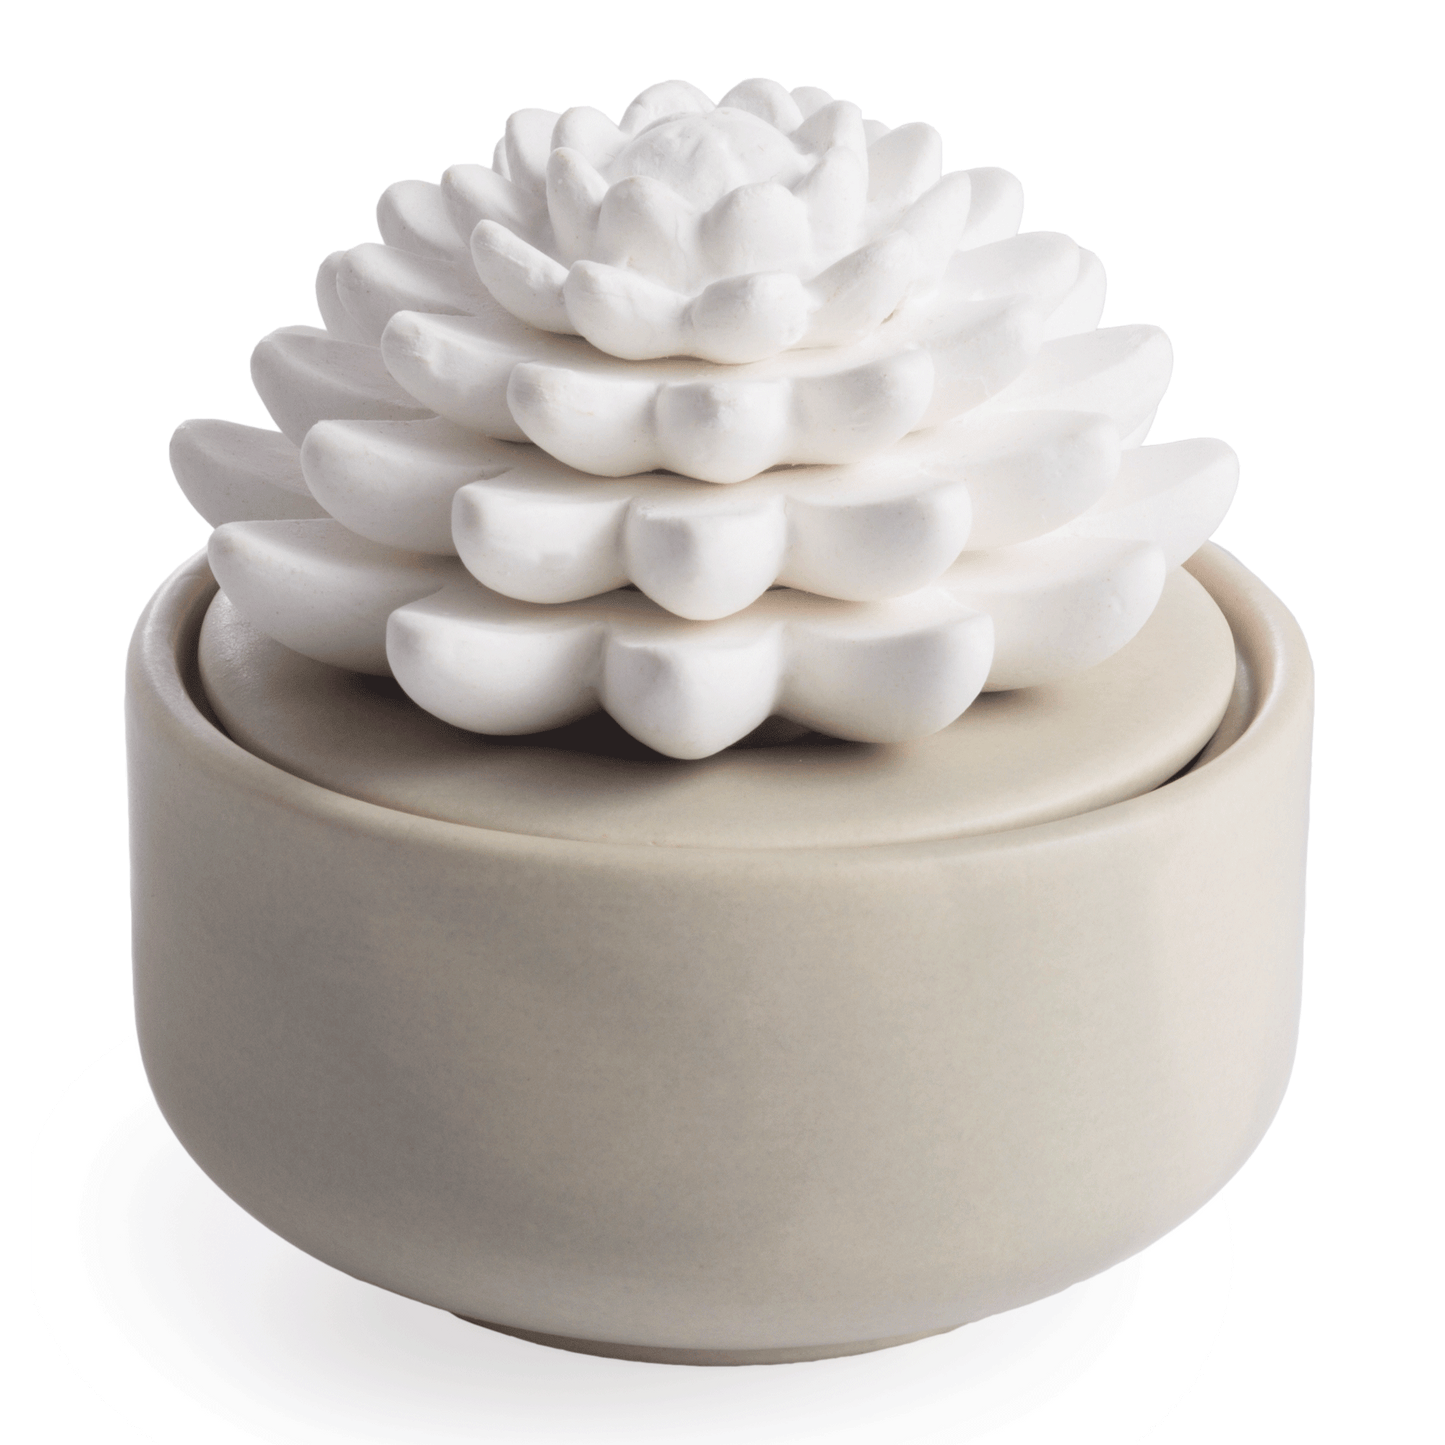 Porcelain Essential Oil Diffusers (includes Peppermint Oil)